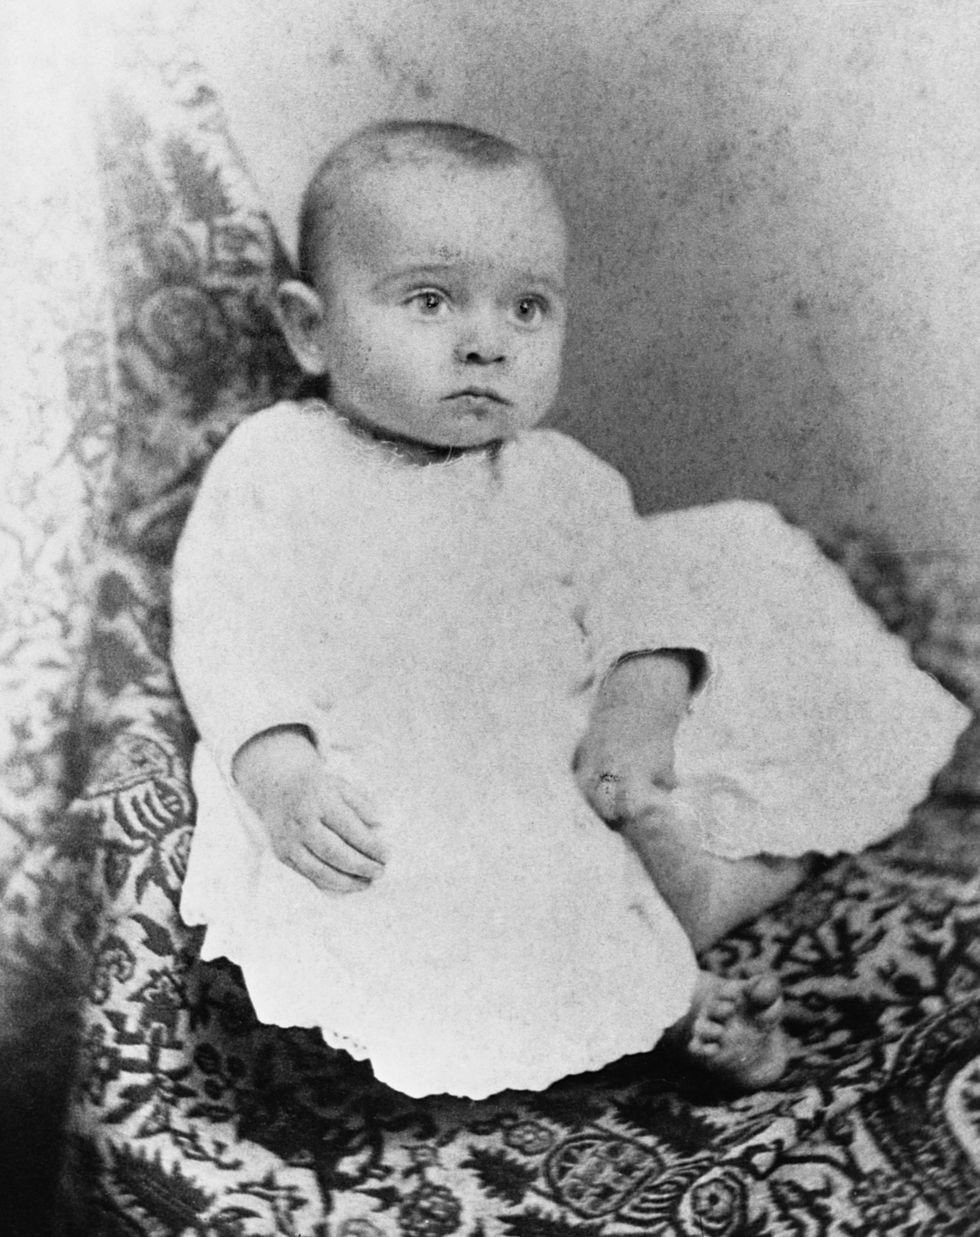 a portrait of harry s truman as a baby